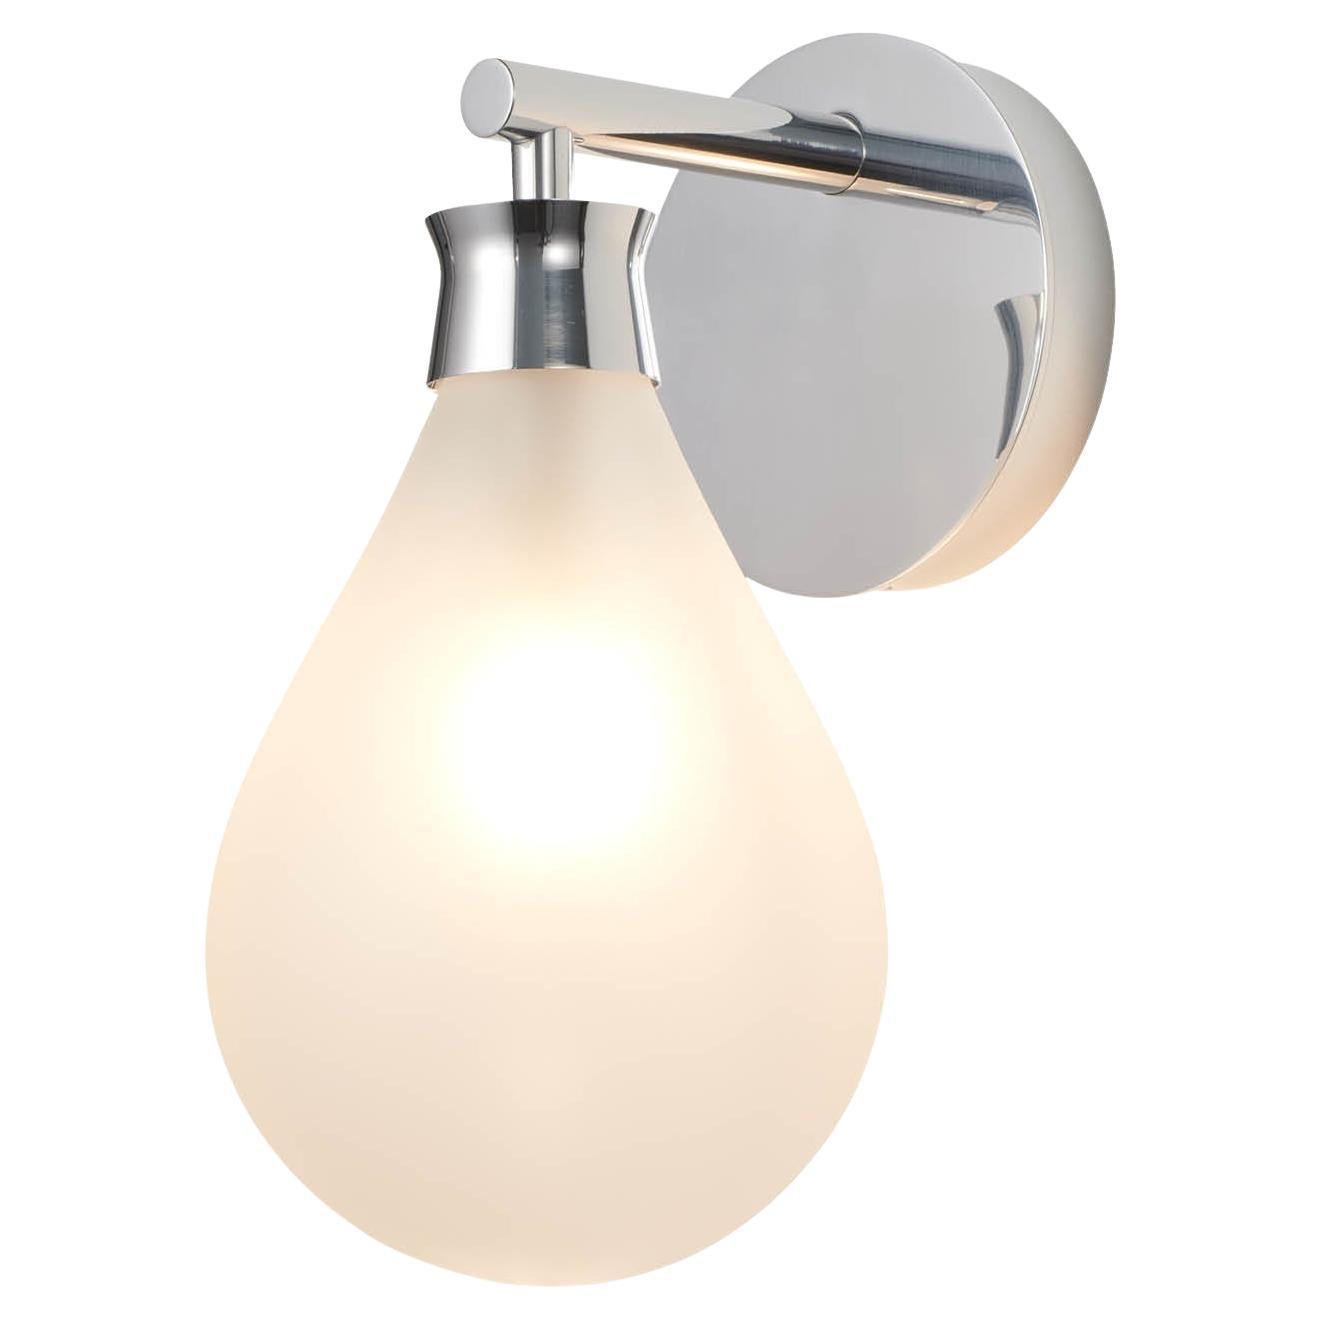 Cintola Wall Light in Polished Aluminium with Frosted Handblown Glass Globe For Sale